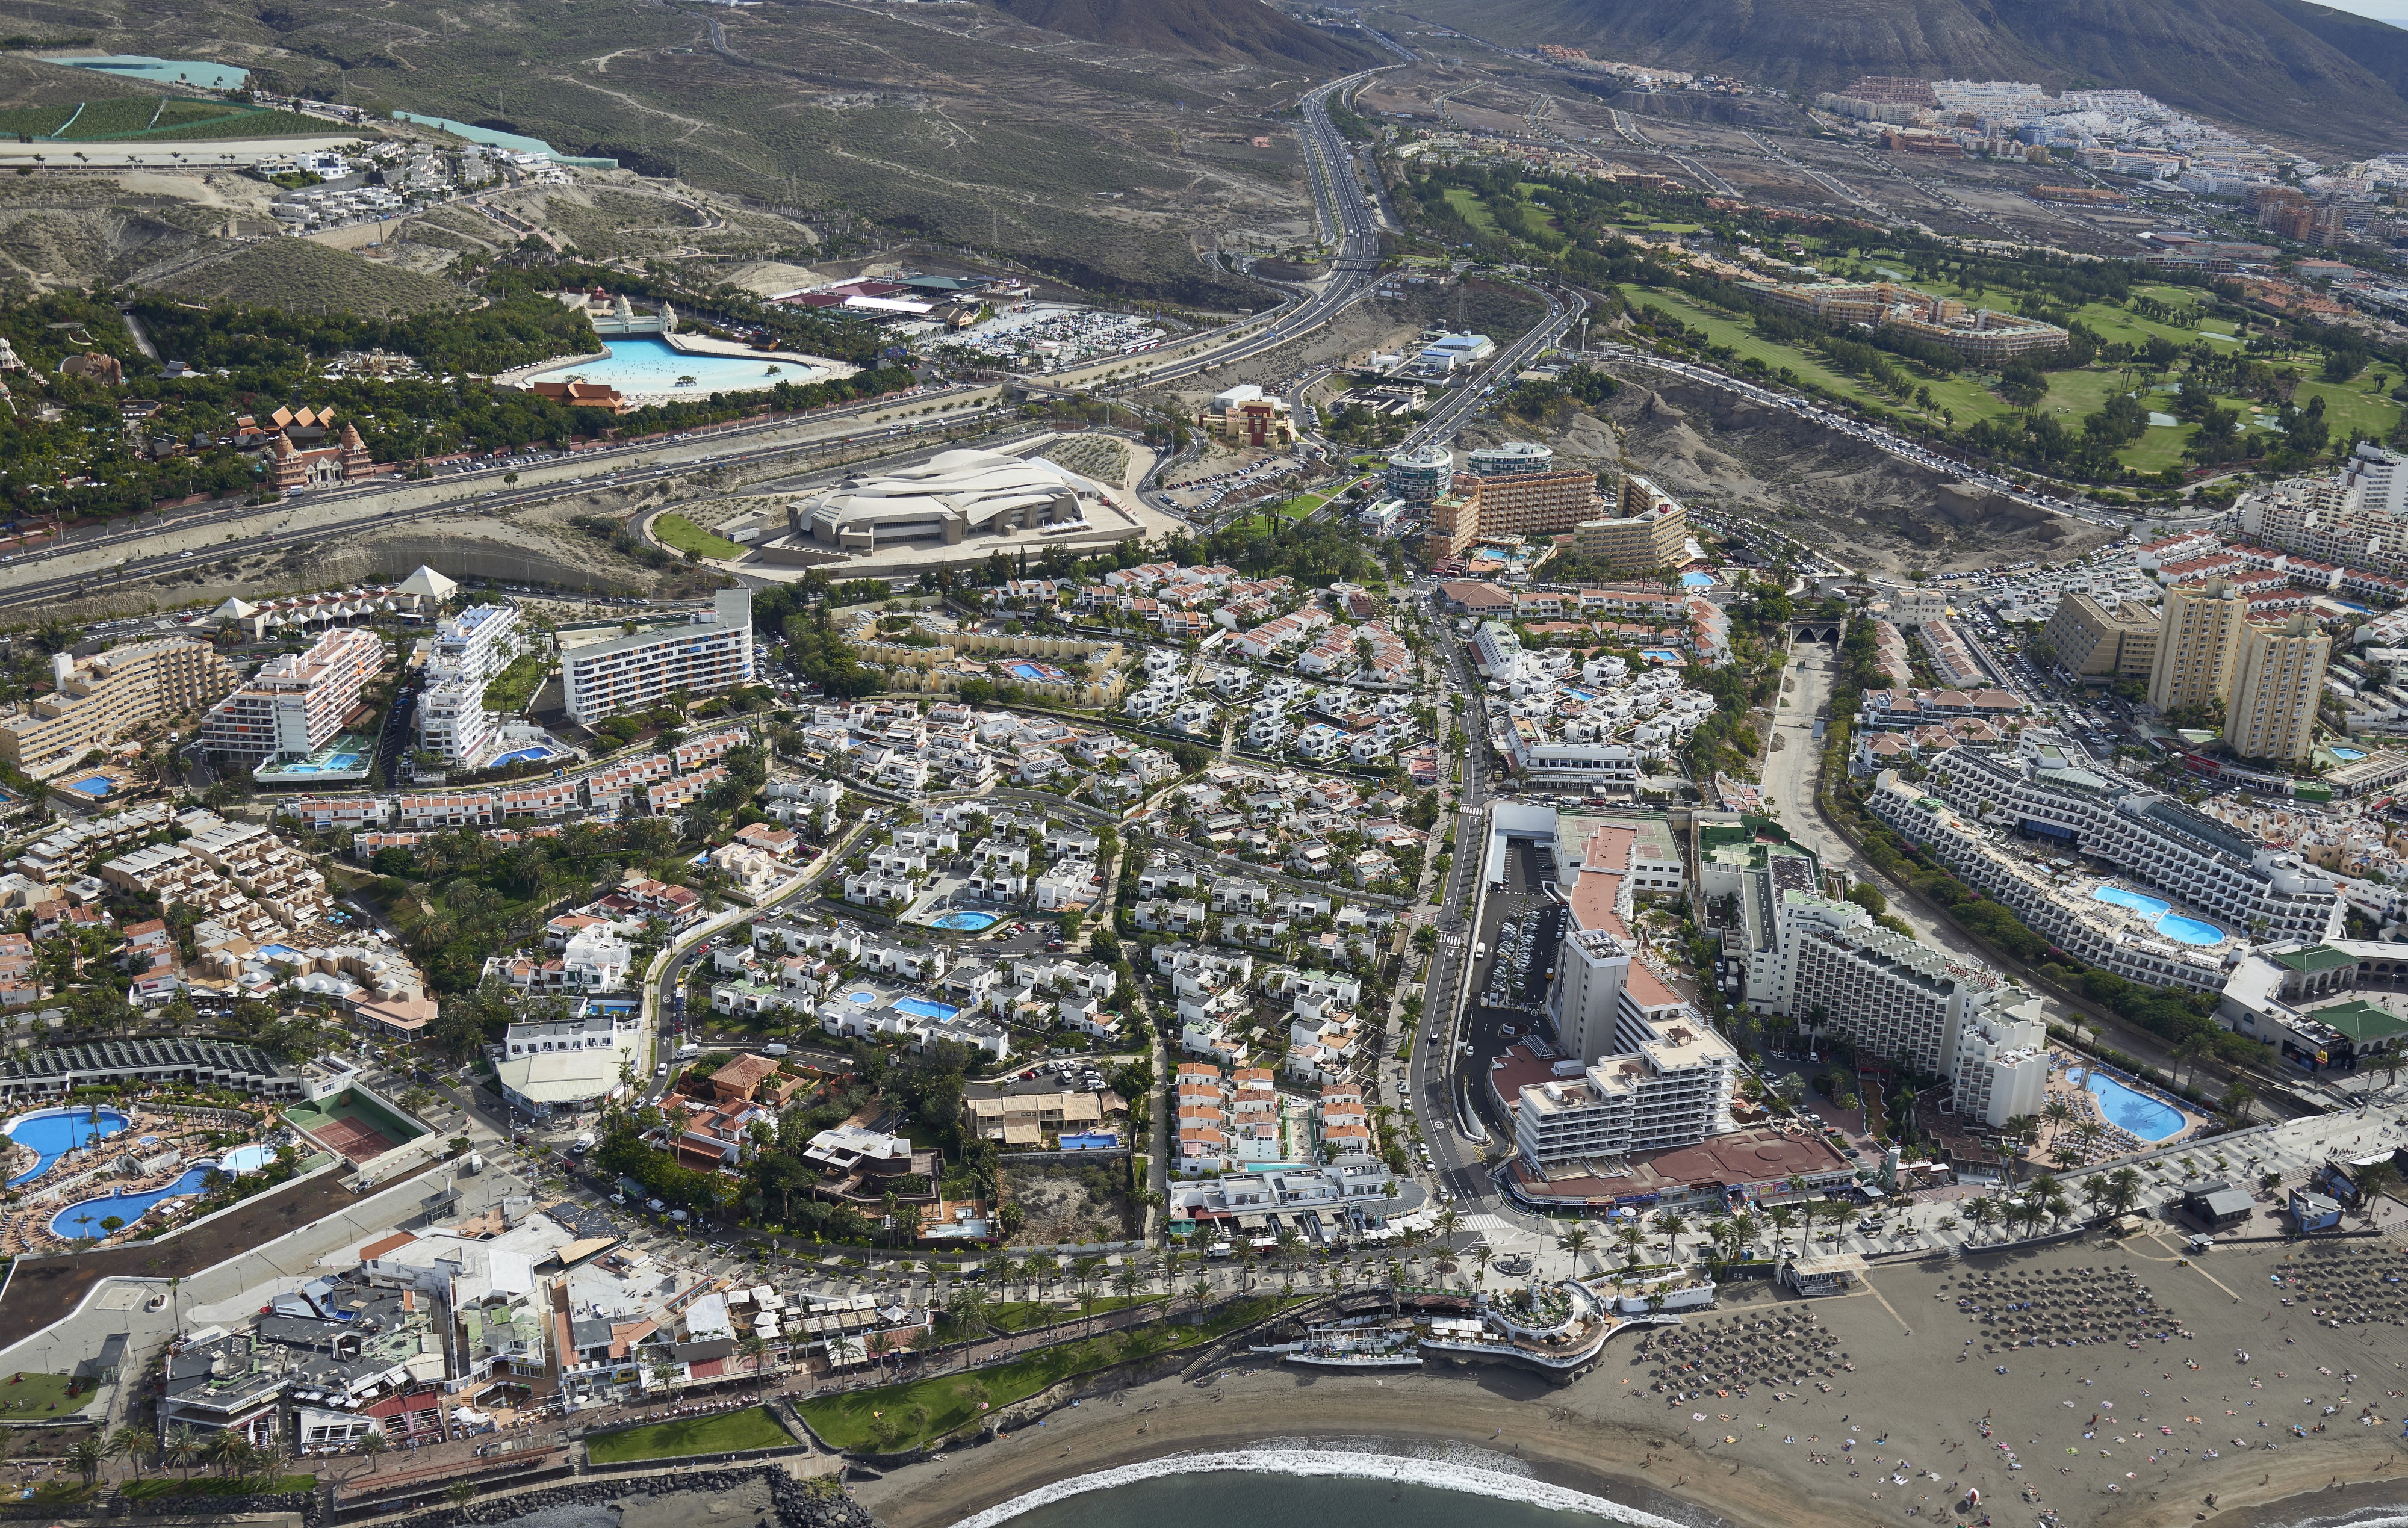 A0443 Tenerife, Adeje aerial view